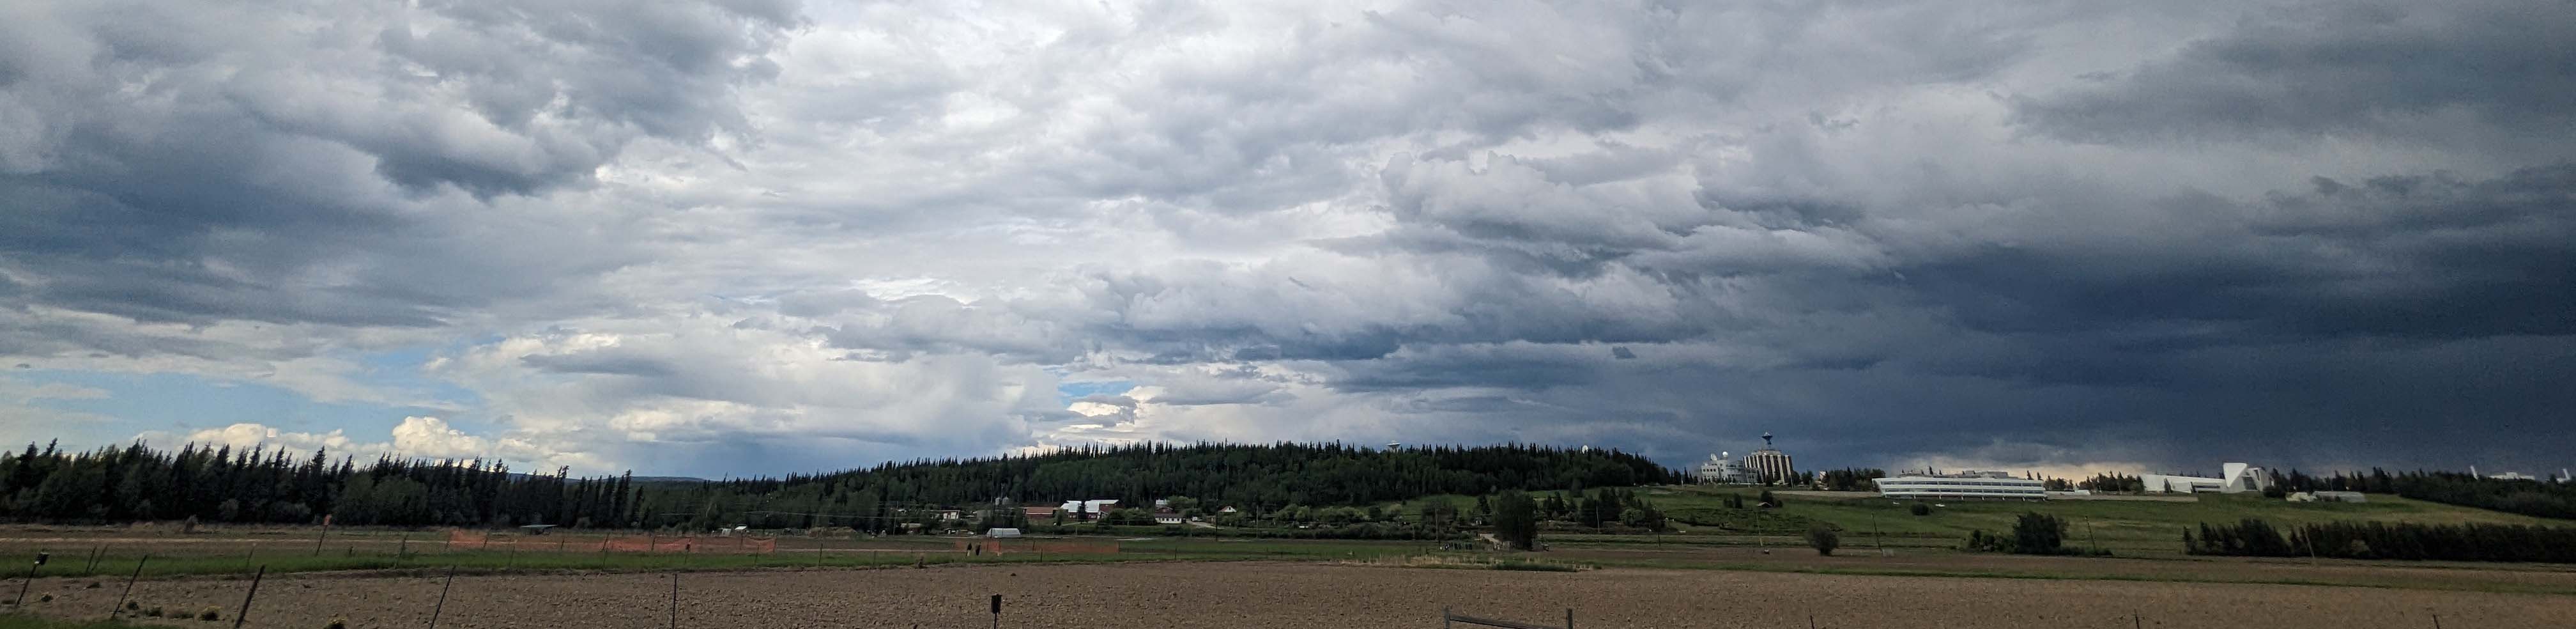 Dark blue stormclouds gathering above UAF campus in the background and the Experiment Farm fields in the foreground